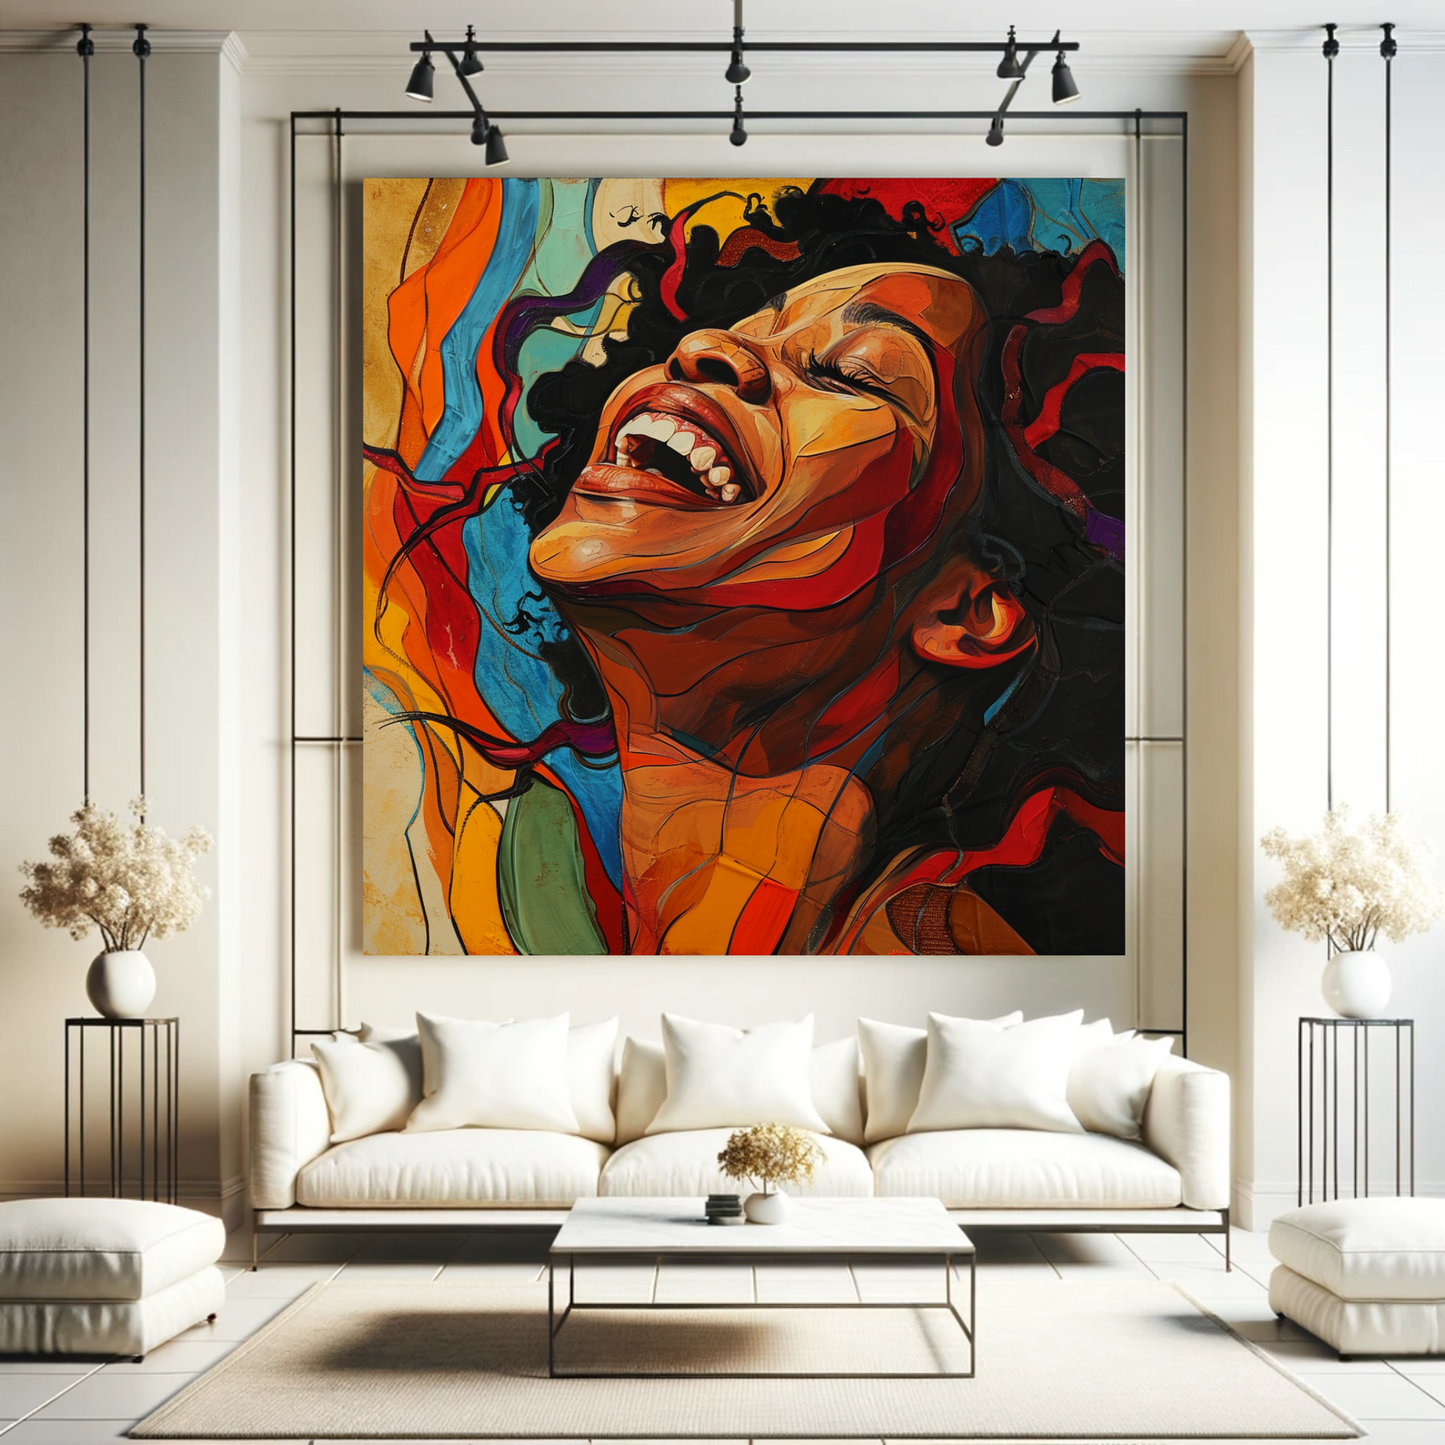 Joyful abstract portrait with a woman laughing, her head thrown back, amidst a swirl of vibrant, flowing colors, conveying a sense of pure bliss | EbMerized Creations